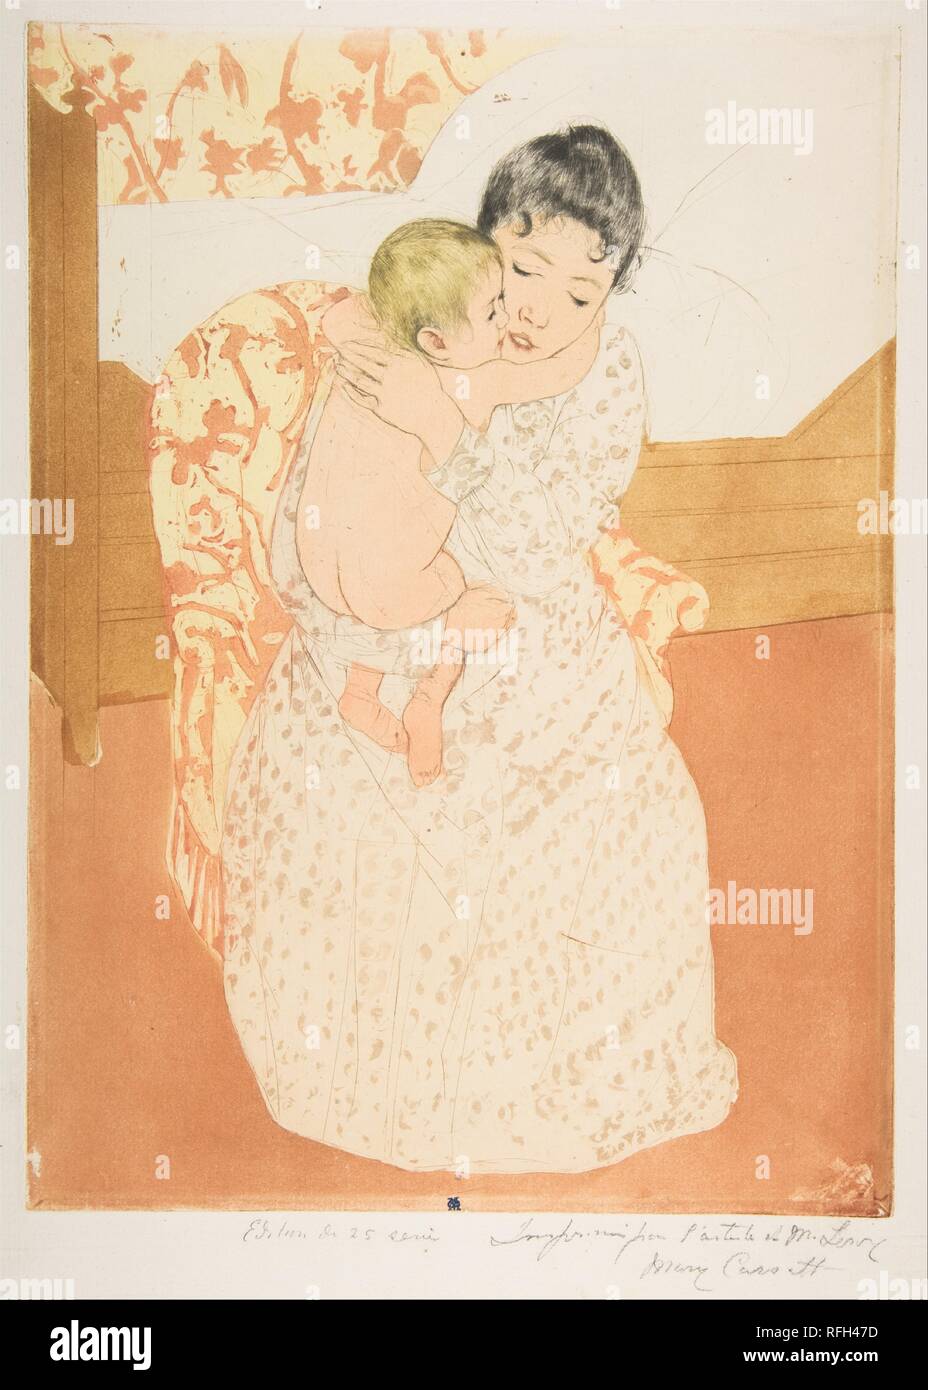 Maternal Caress. Artist: Mary Cassatt (American, Pittsburgh, Pennsylvania 1844-1926 Le Mesnil-Théribus, Oise). Dimensions: plate: 14 3/8 x 10 9/16 in. (36.5 x 26.8 cm)  sheet: 17 1/4 x 11 15/16 in. (43.8 x 30.3 cm). Date: 1890-91.  In her clear-headed treatment of mothers and infants, Cassatt was, for her time, entirely alone. 'The bunch of English and French daubers have put them in such stupid and pretentious poses!' complained the critic J.-K. Huysmans, contrasting them with Cassatt's 'irreproachable pearls of Oriental sweetness.'. Museum: Metropolitan Museum of Art, New York, USA. Stock Photo